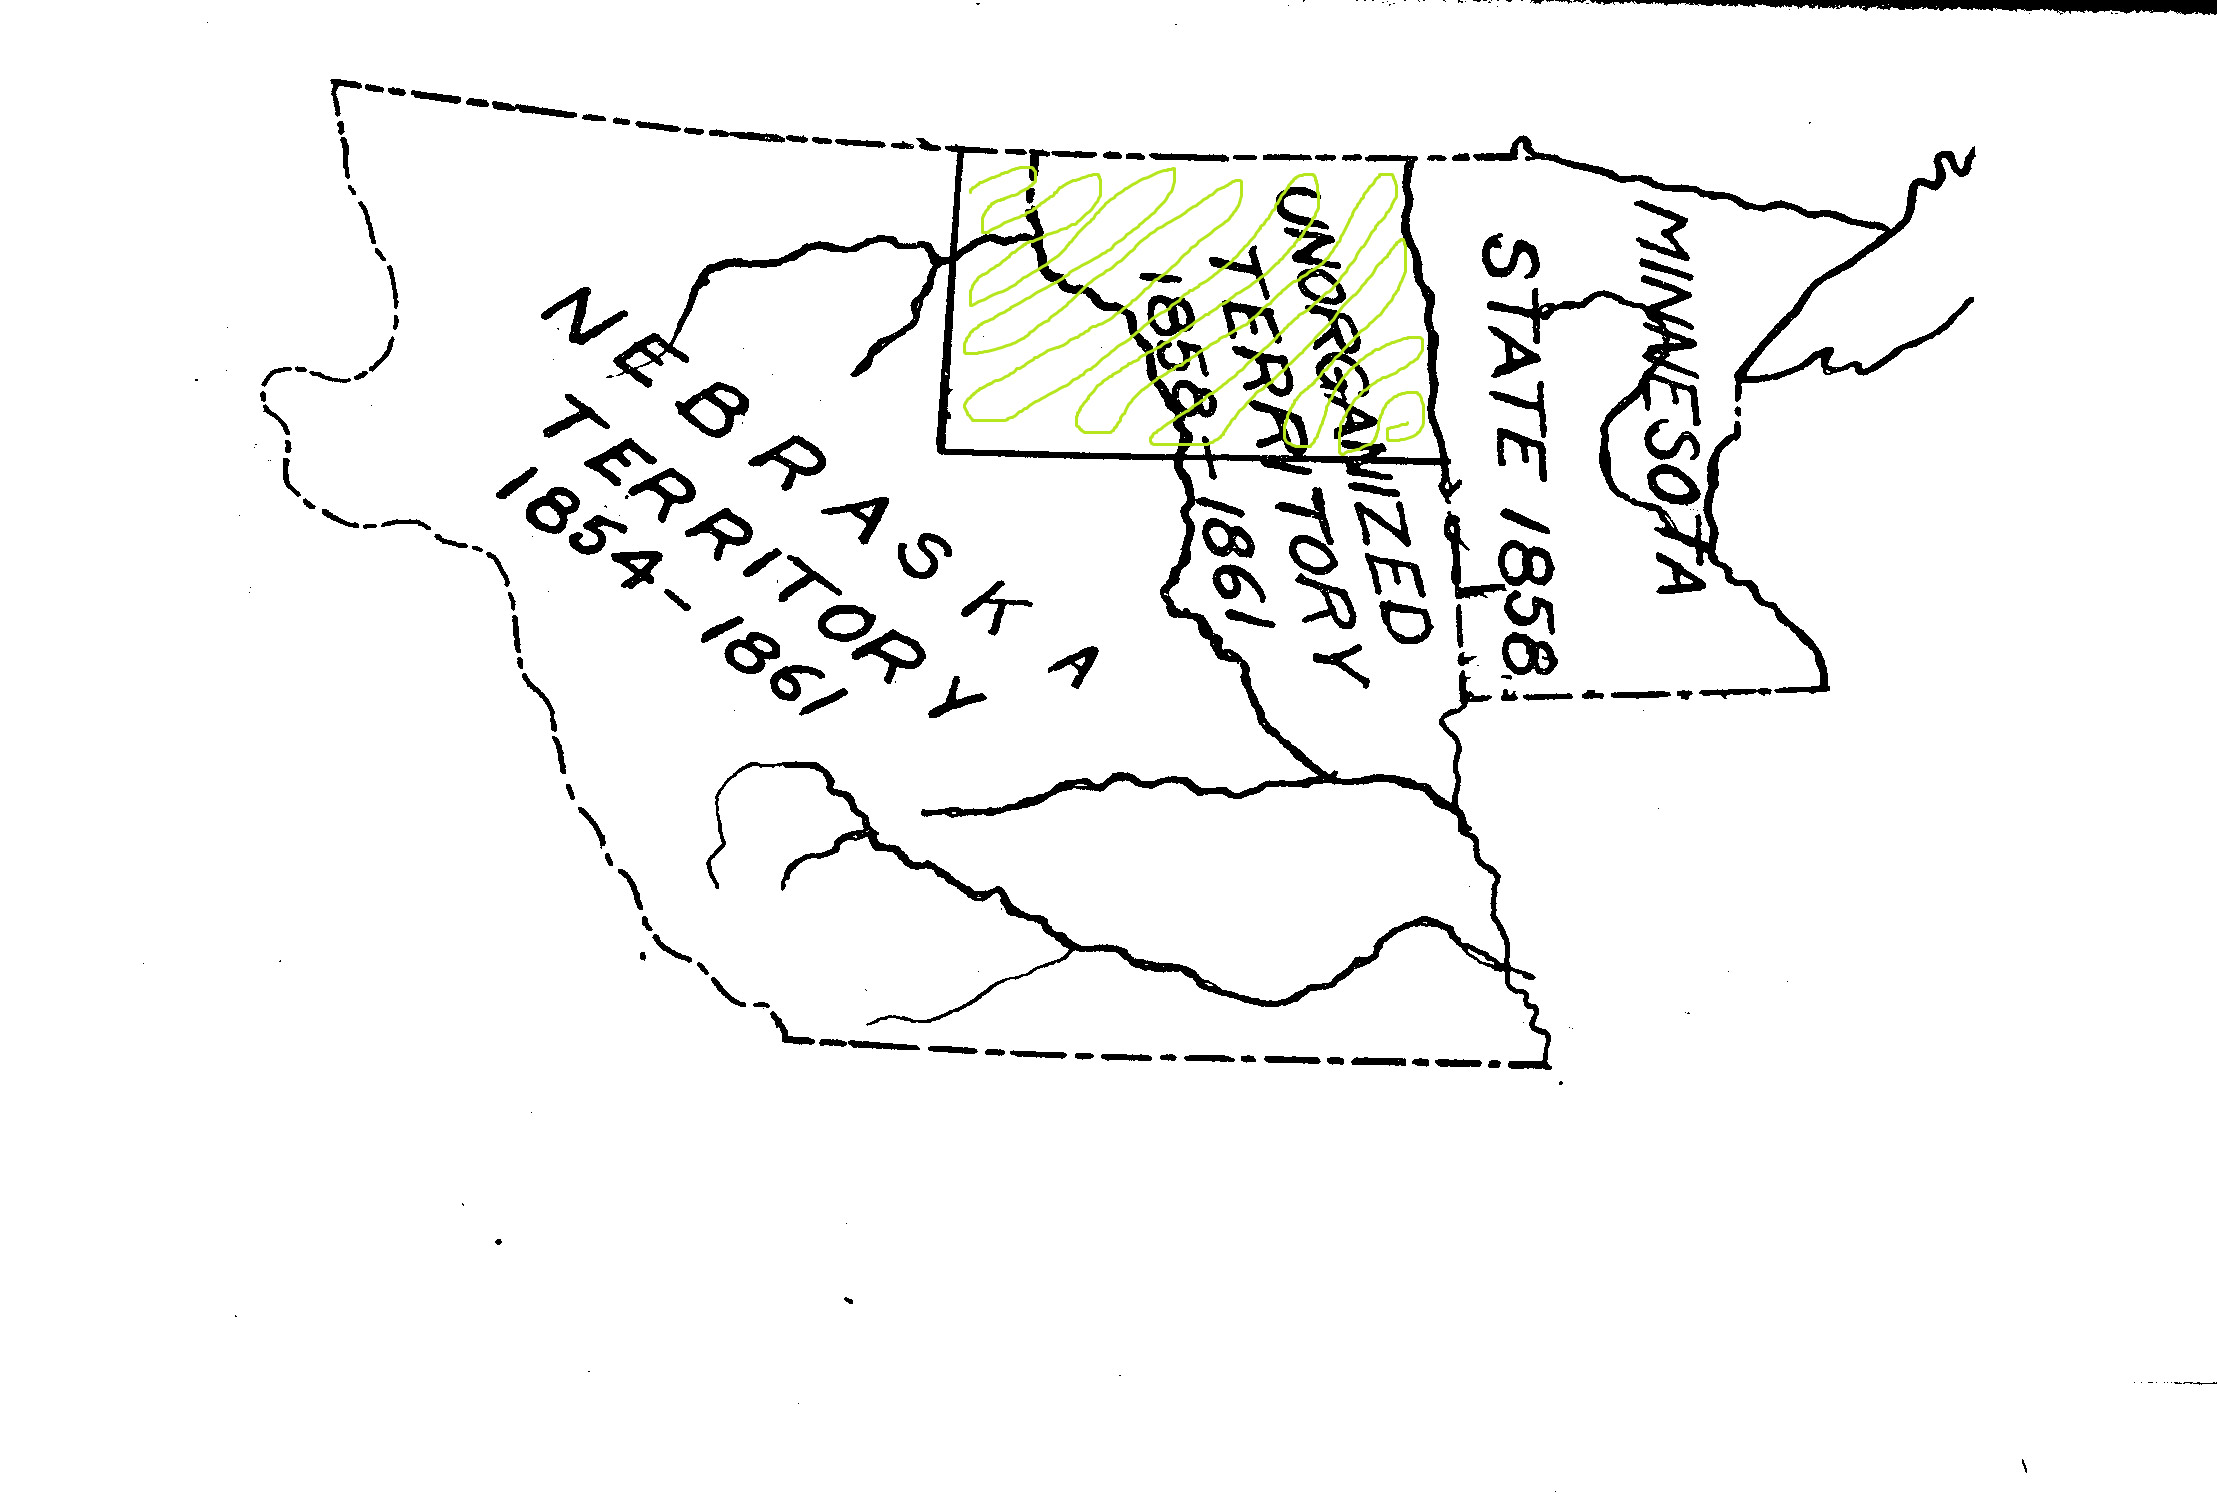 Nebraska Territory continued to claim the West River country until 1861. Minnesota became a state in 1858 without the area west of the Red River. The land between the Red River and the Missouri River was unorganized. It had no government and no representation in Congress.